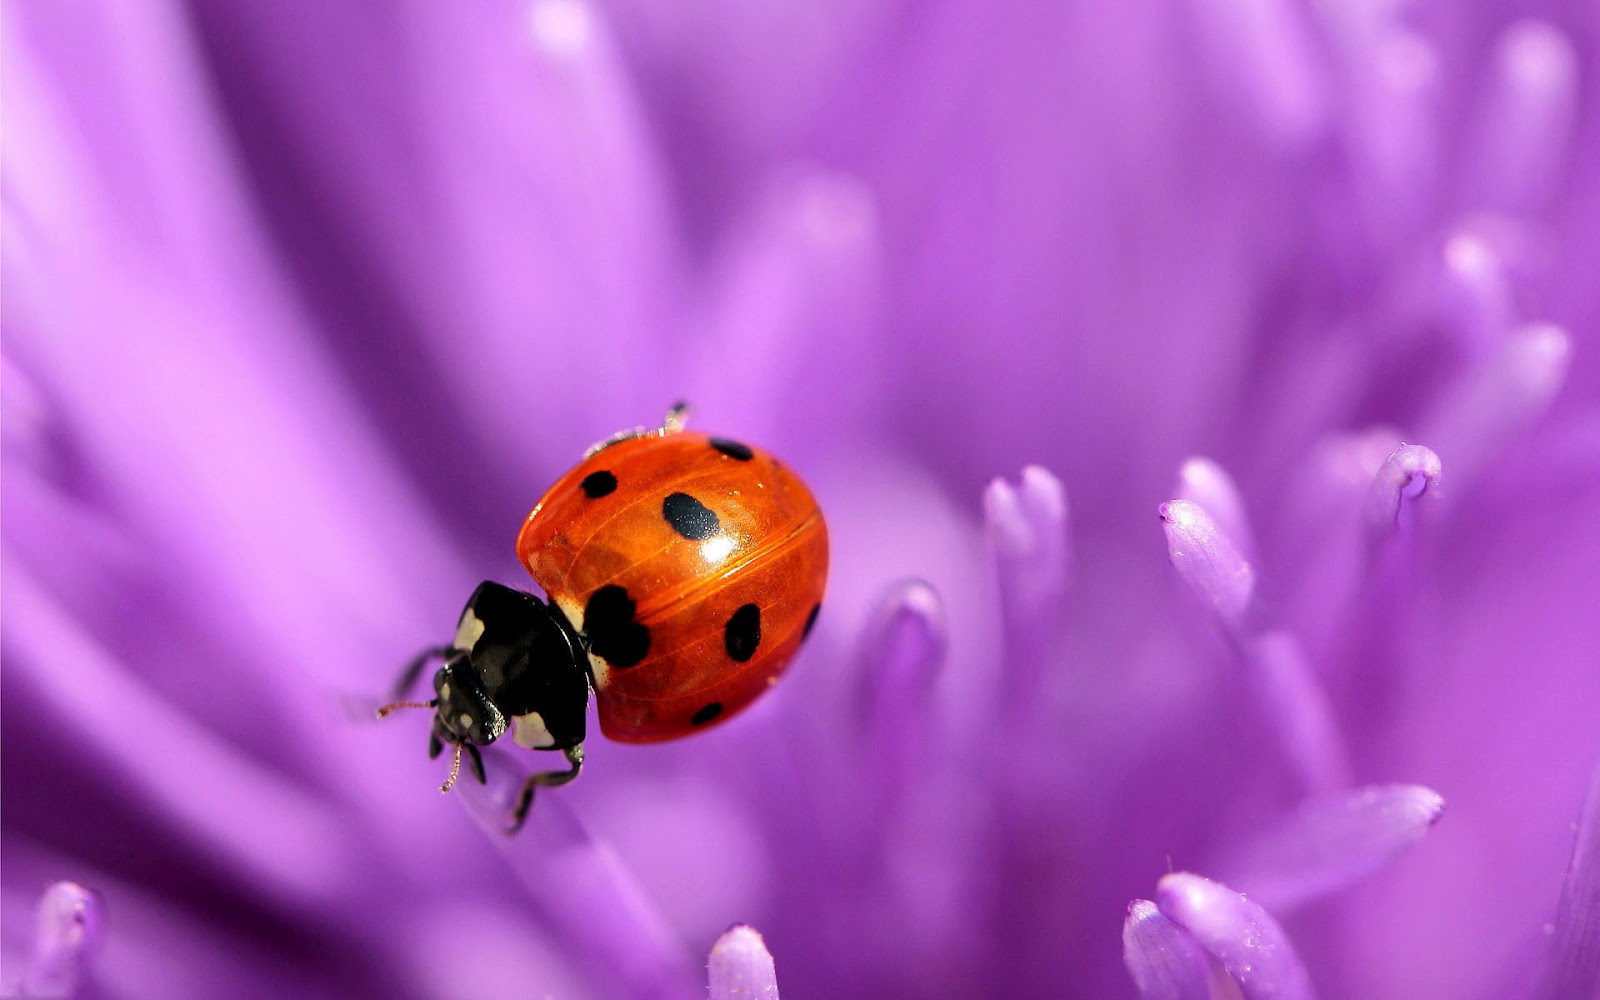 Gallery For Gt Ladybug And Flowers Background